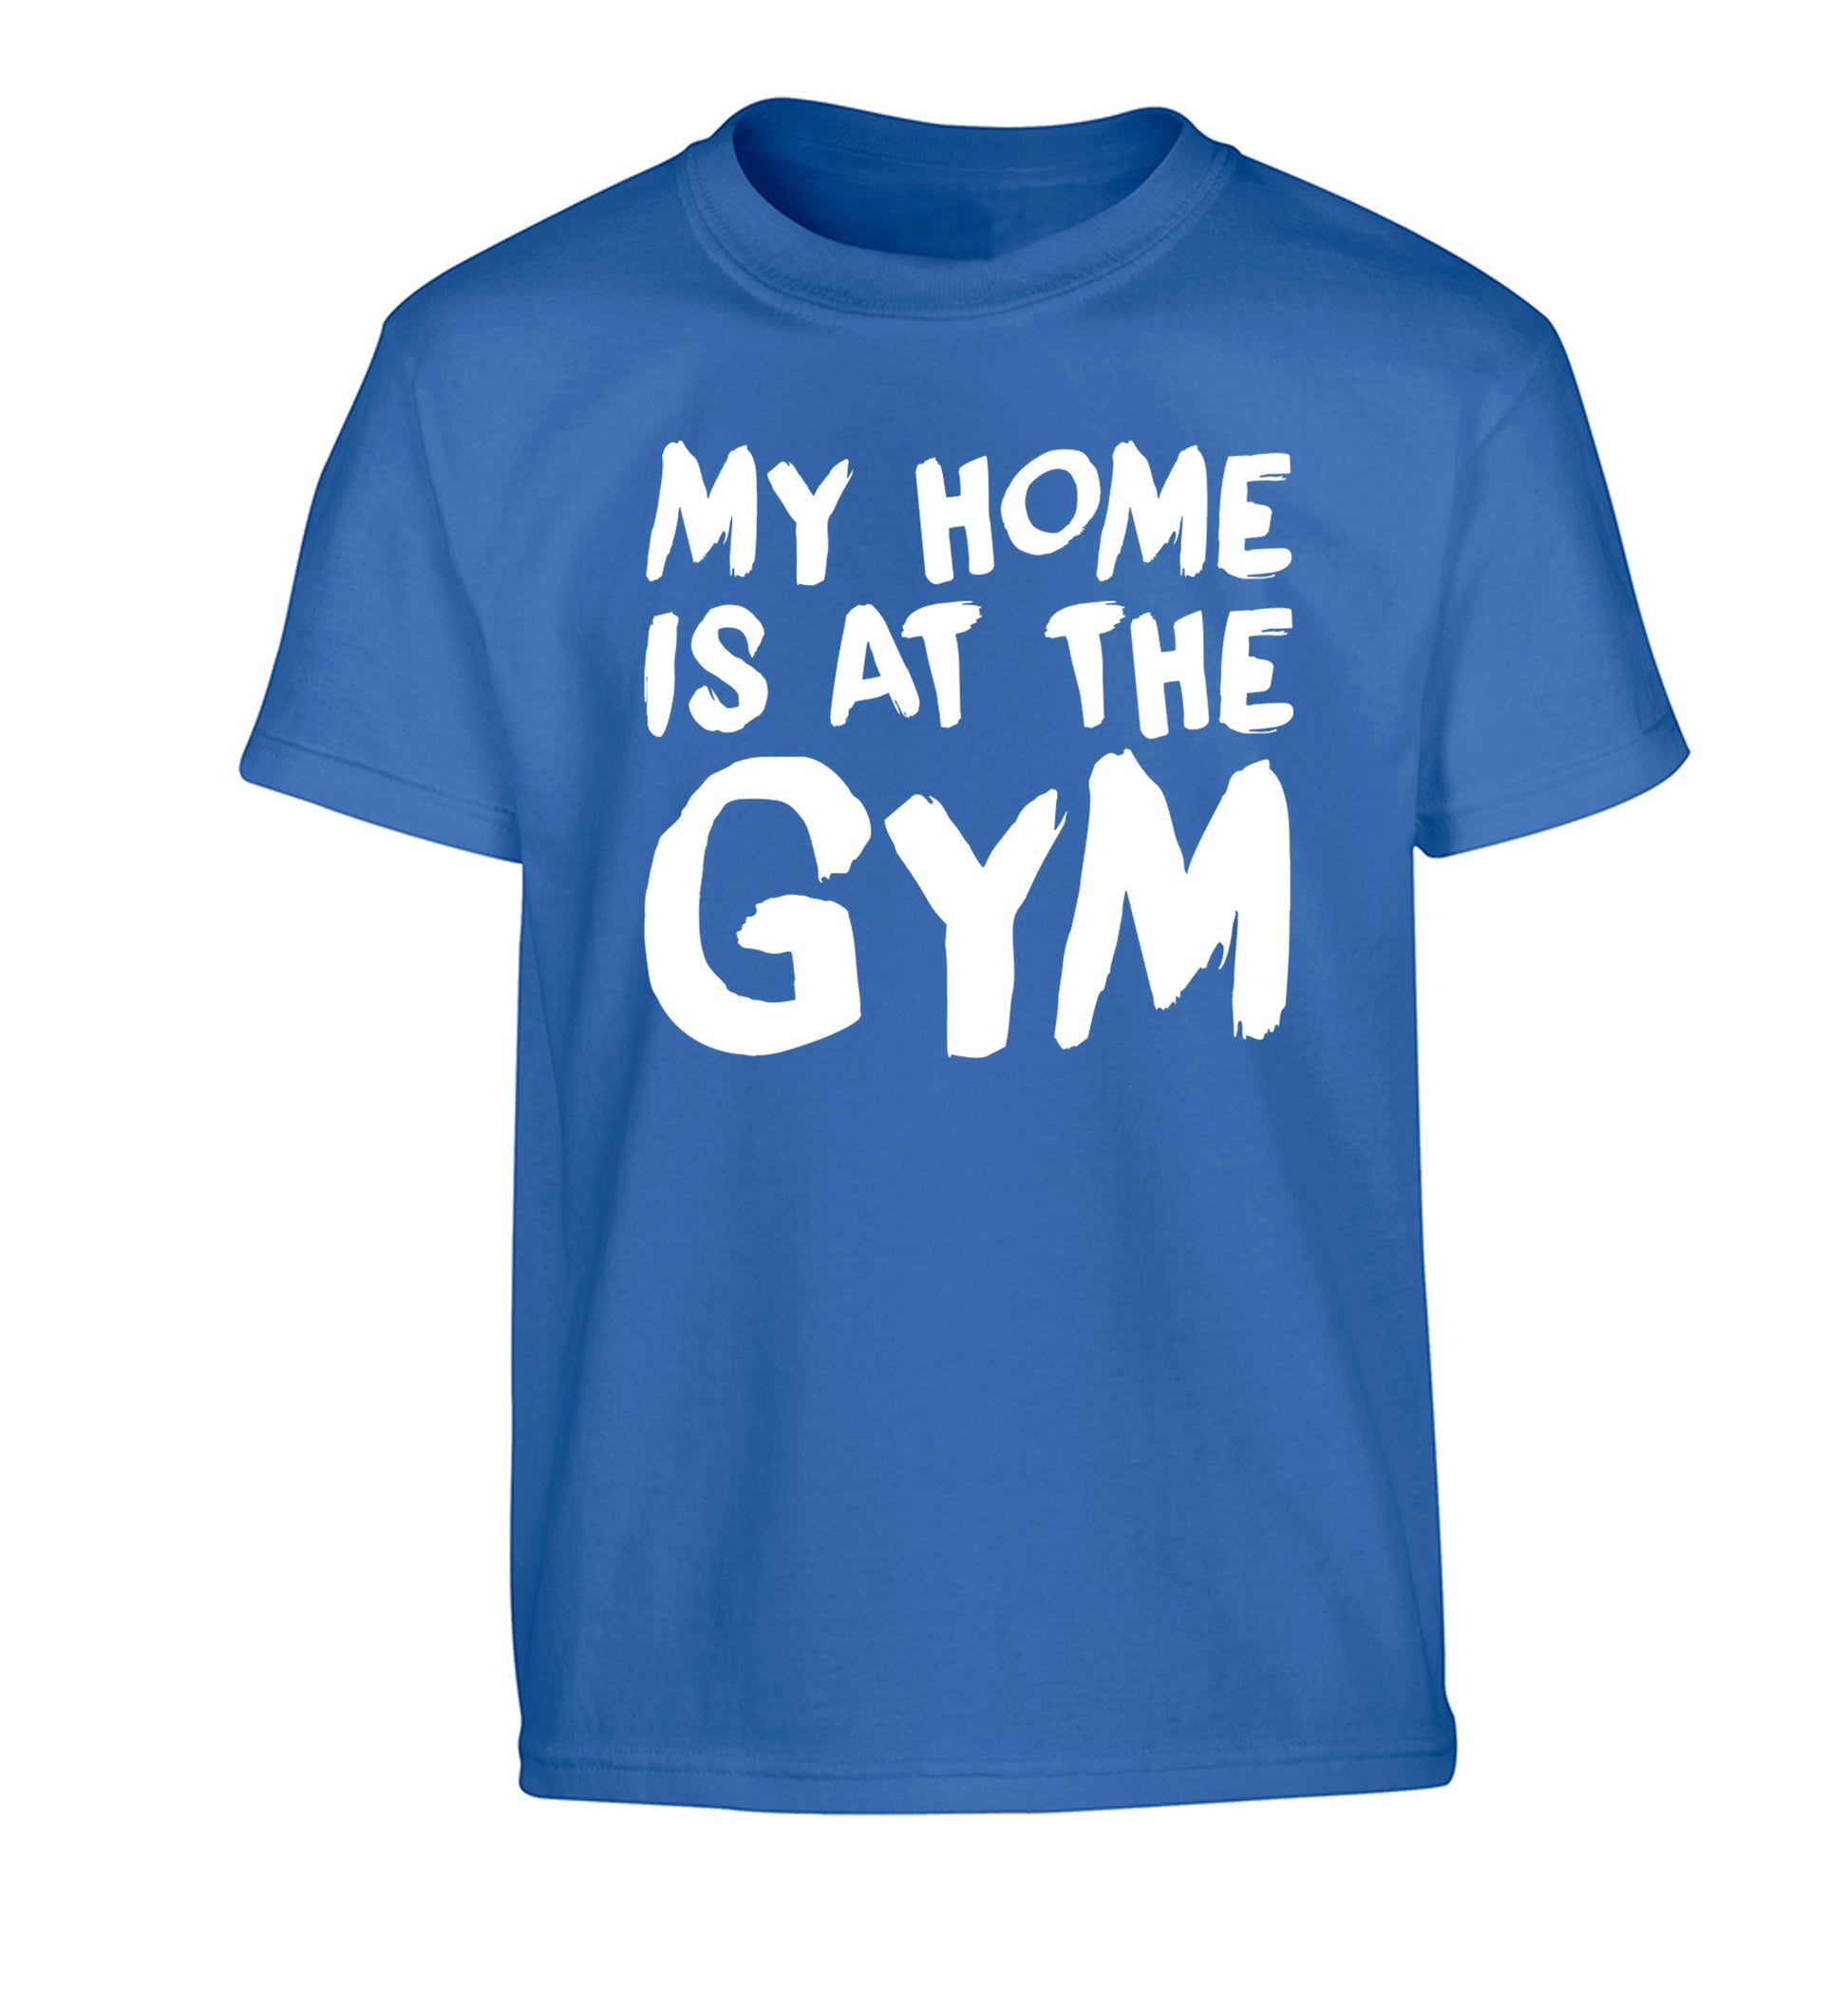 My home is at the gym Children's blue Tshirt 12-14 Years